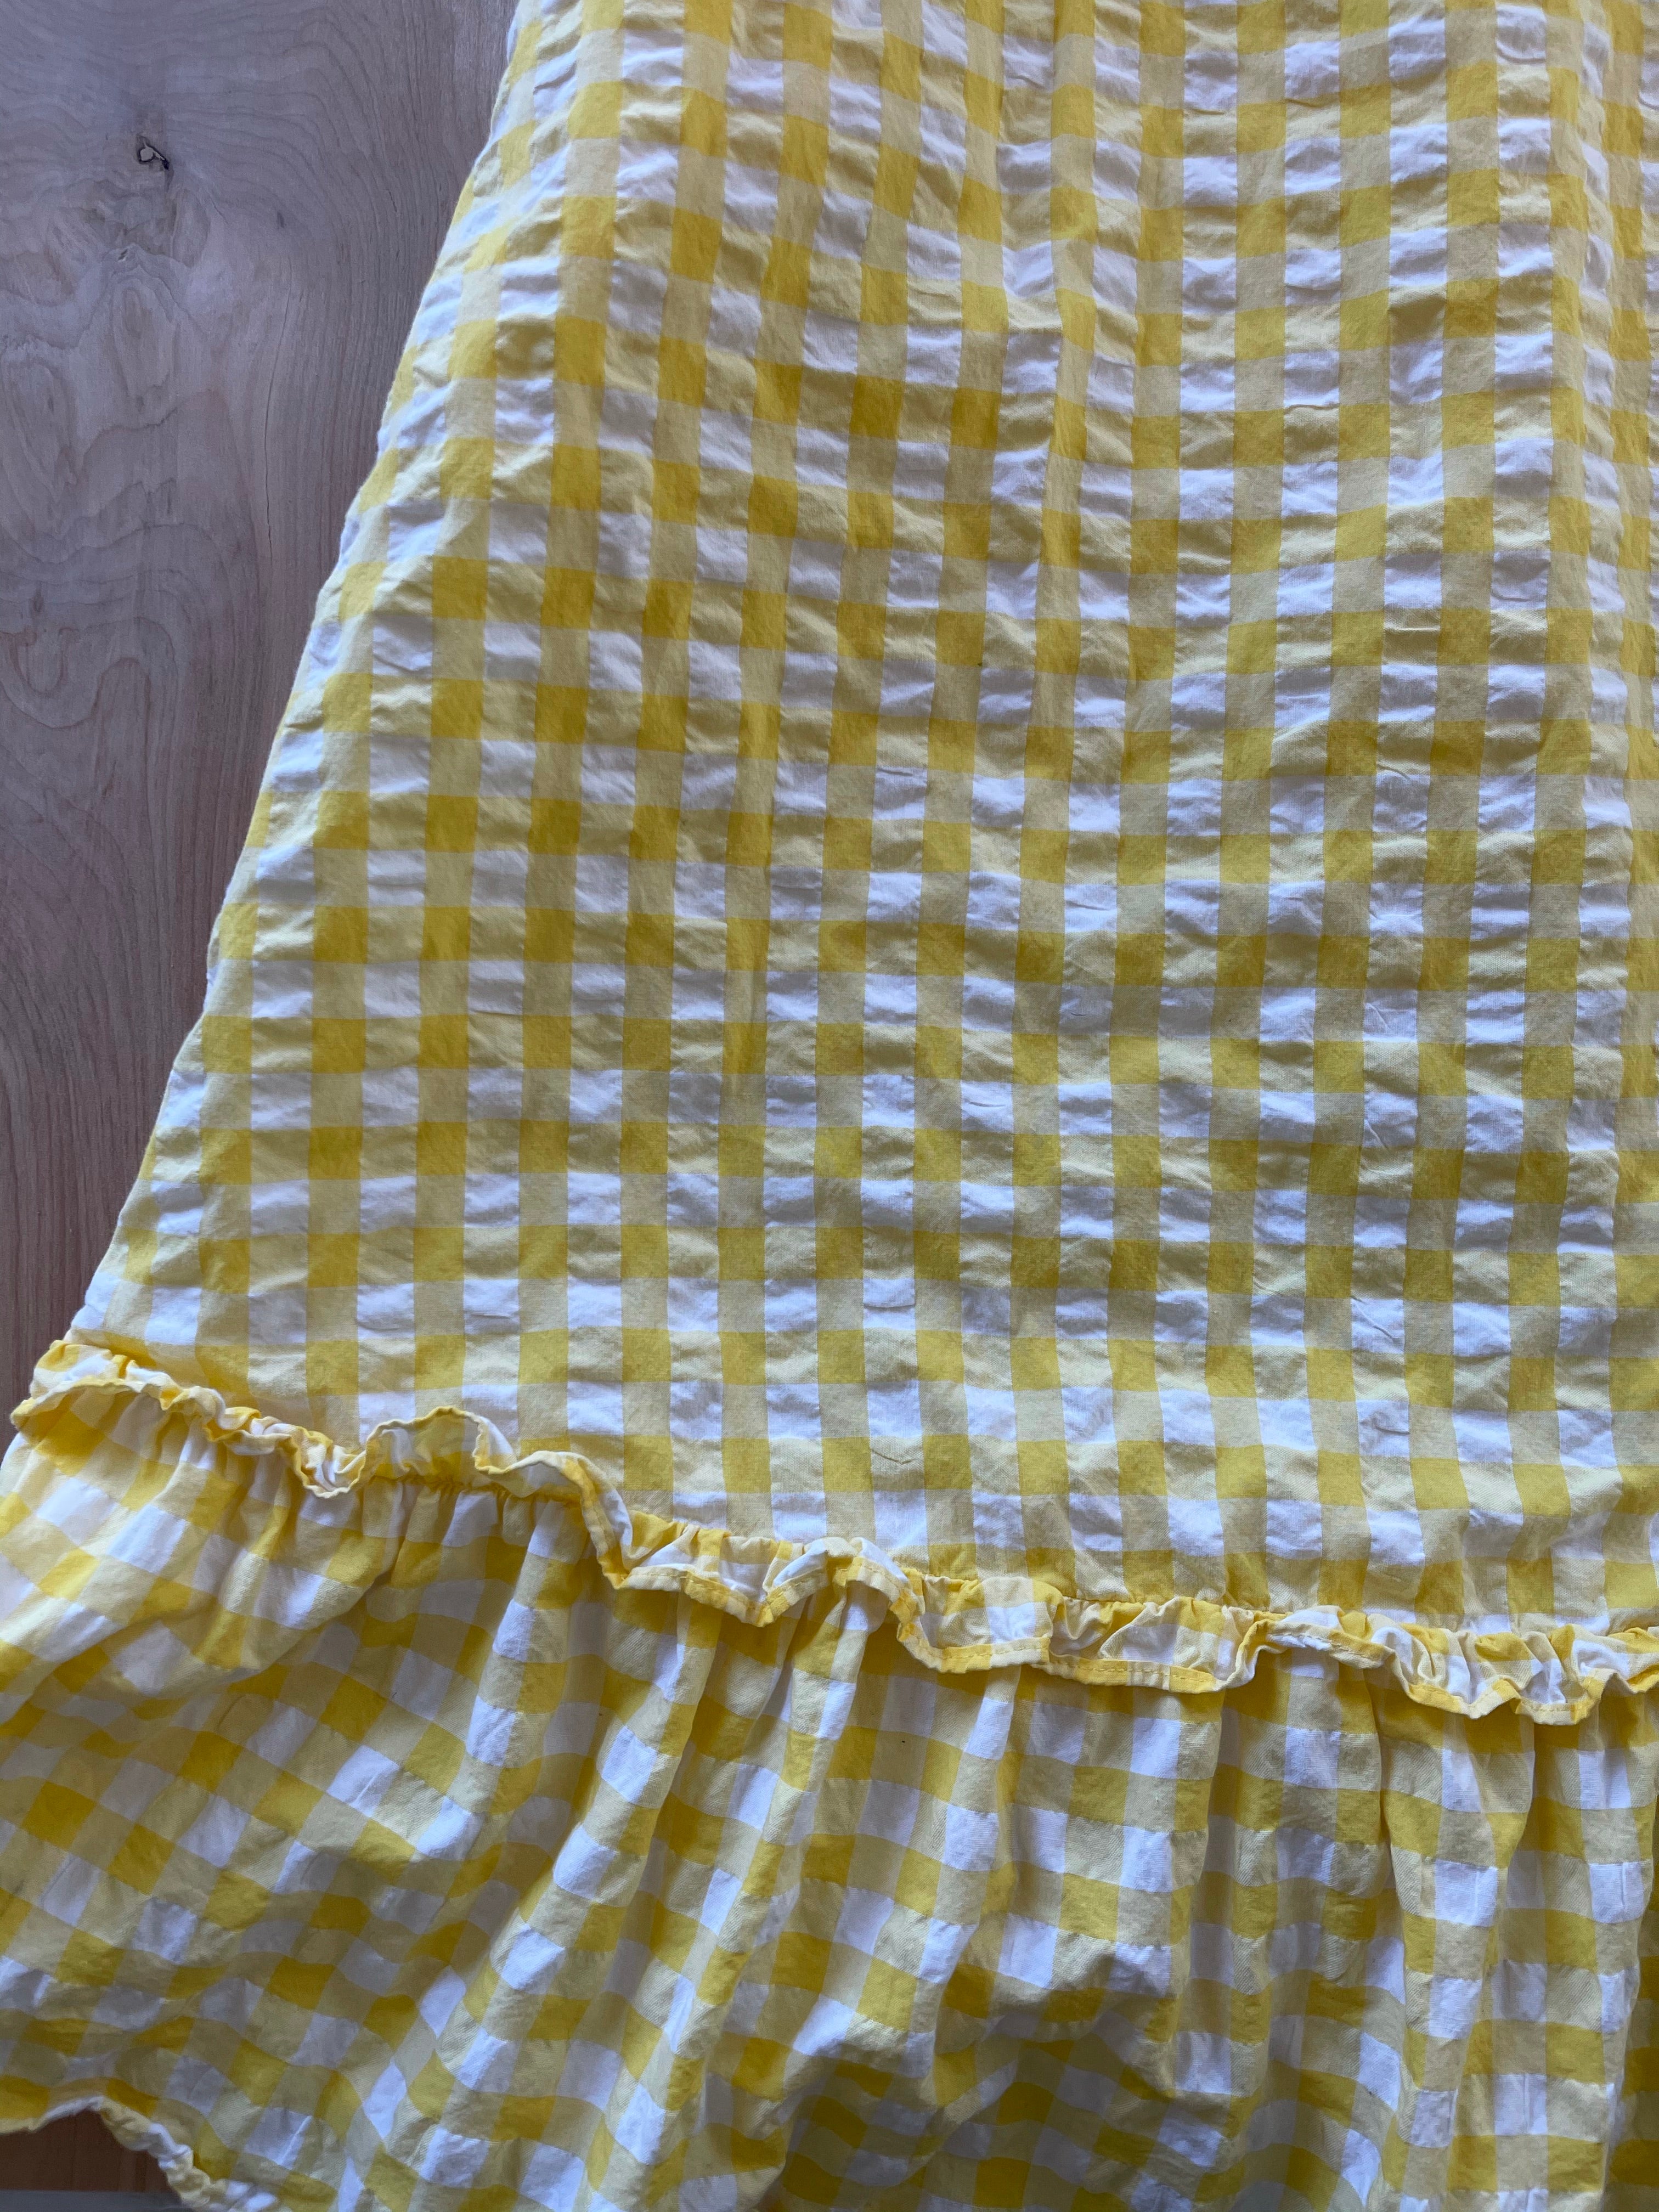 On A Picnic Gingham Maxi